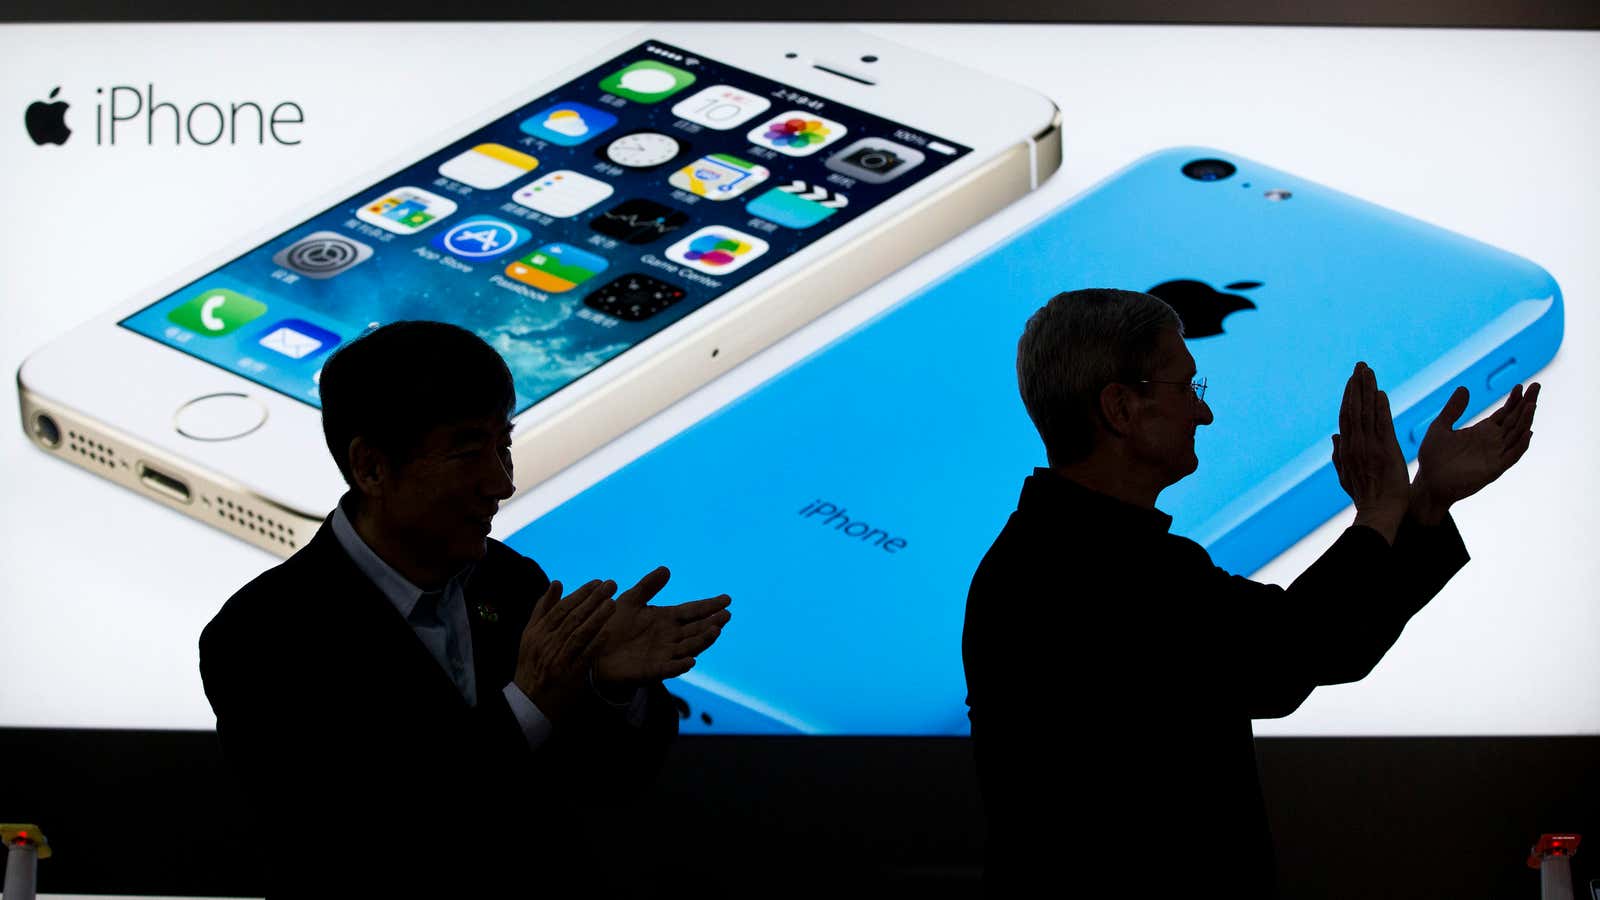 Tim Cook and China Mobile’s chairman Xi Guohua unveiling the iPhone5 in Beijing in 2014.